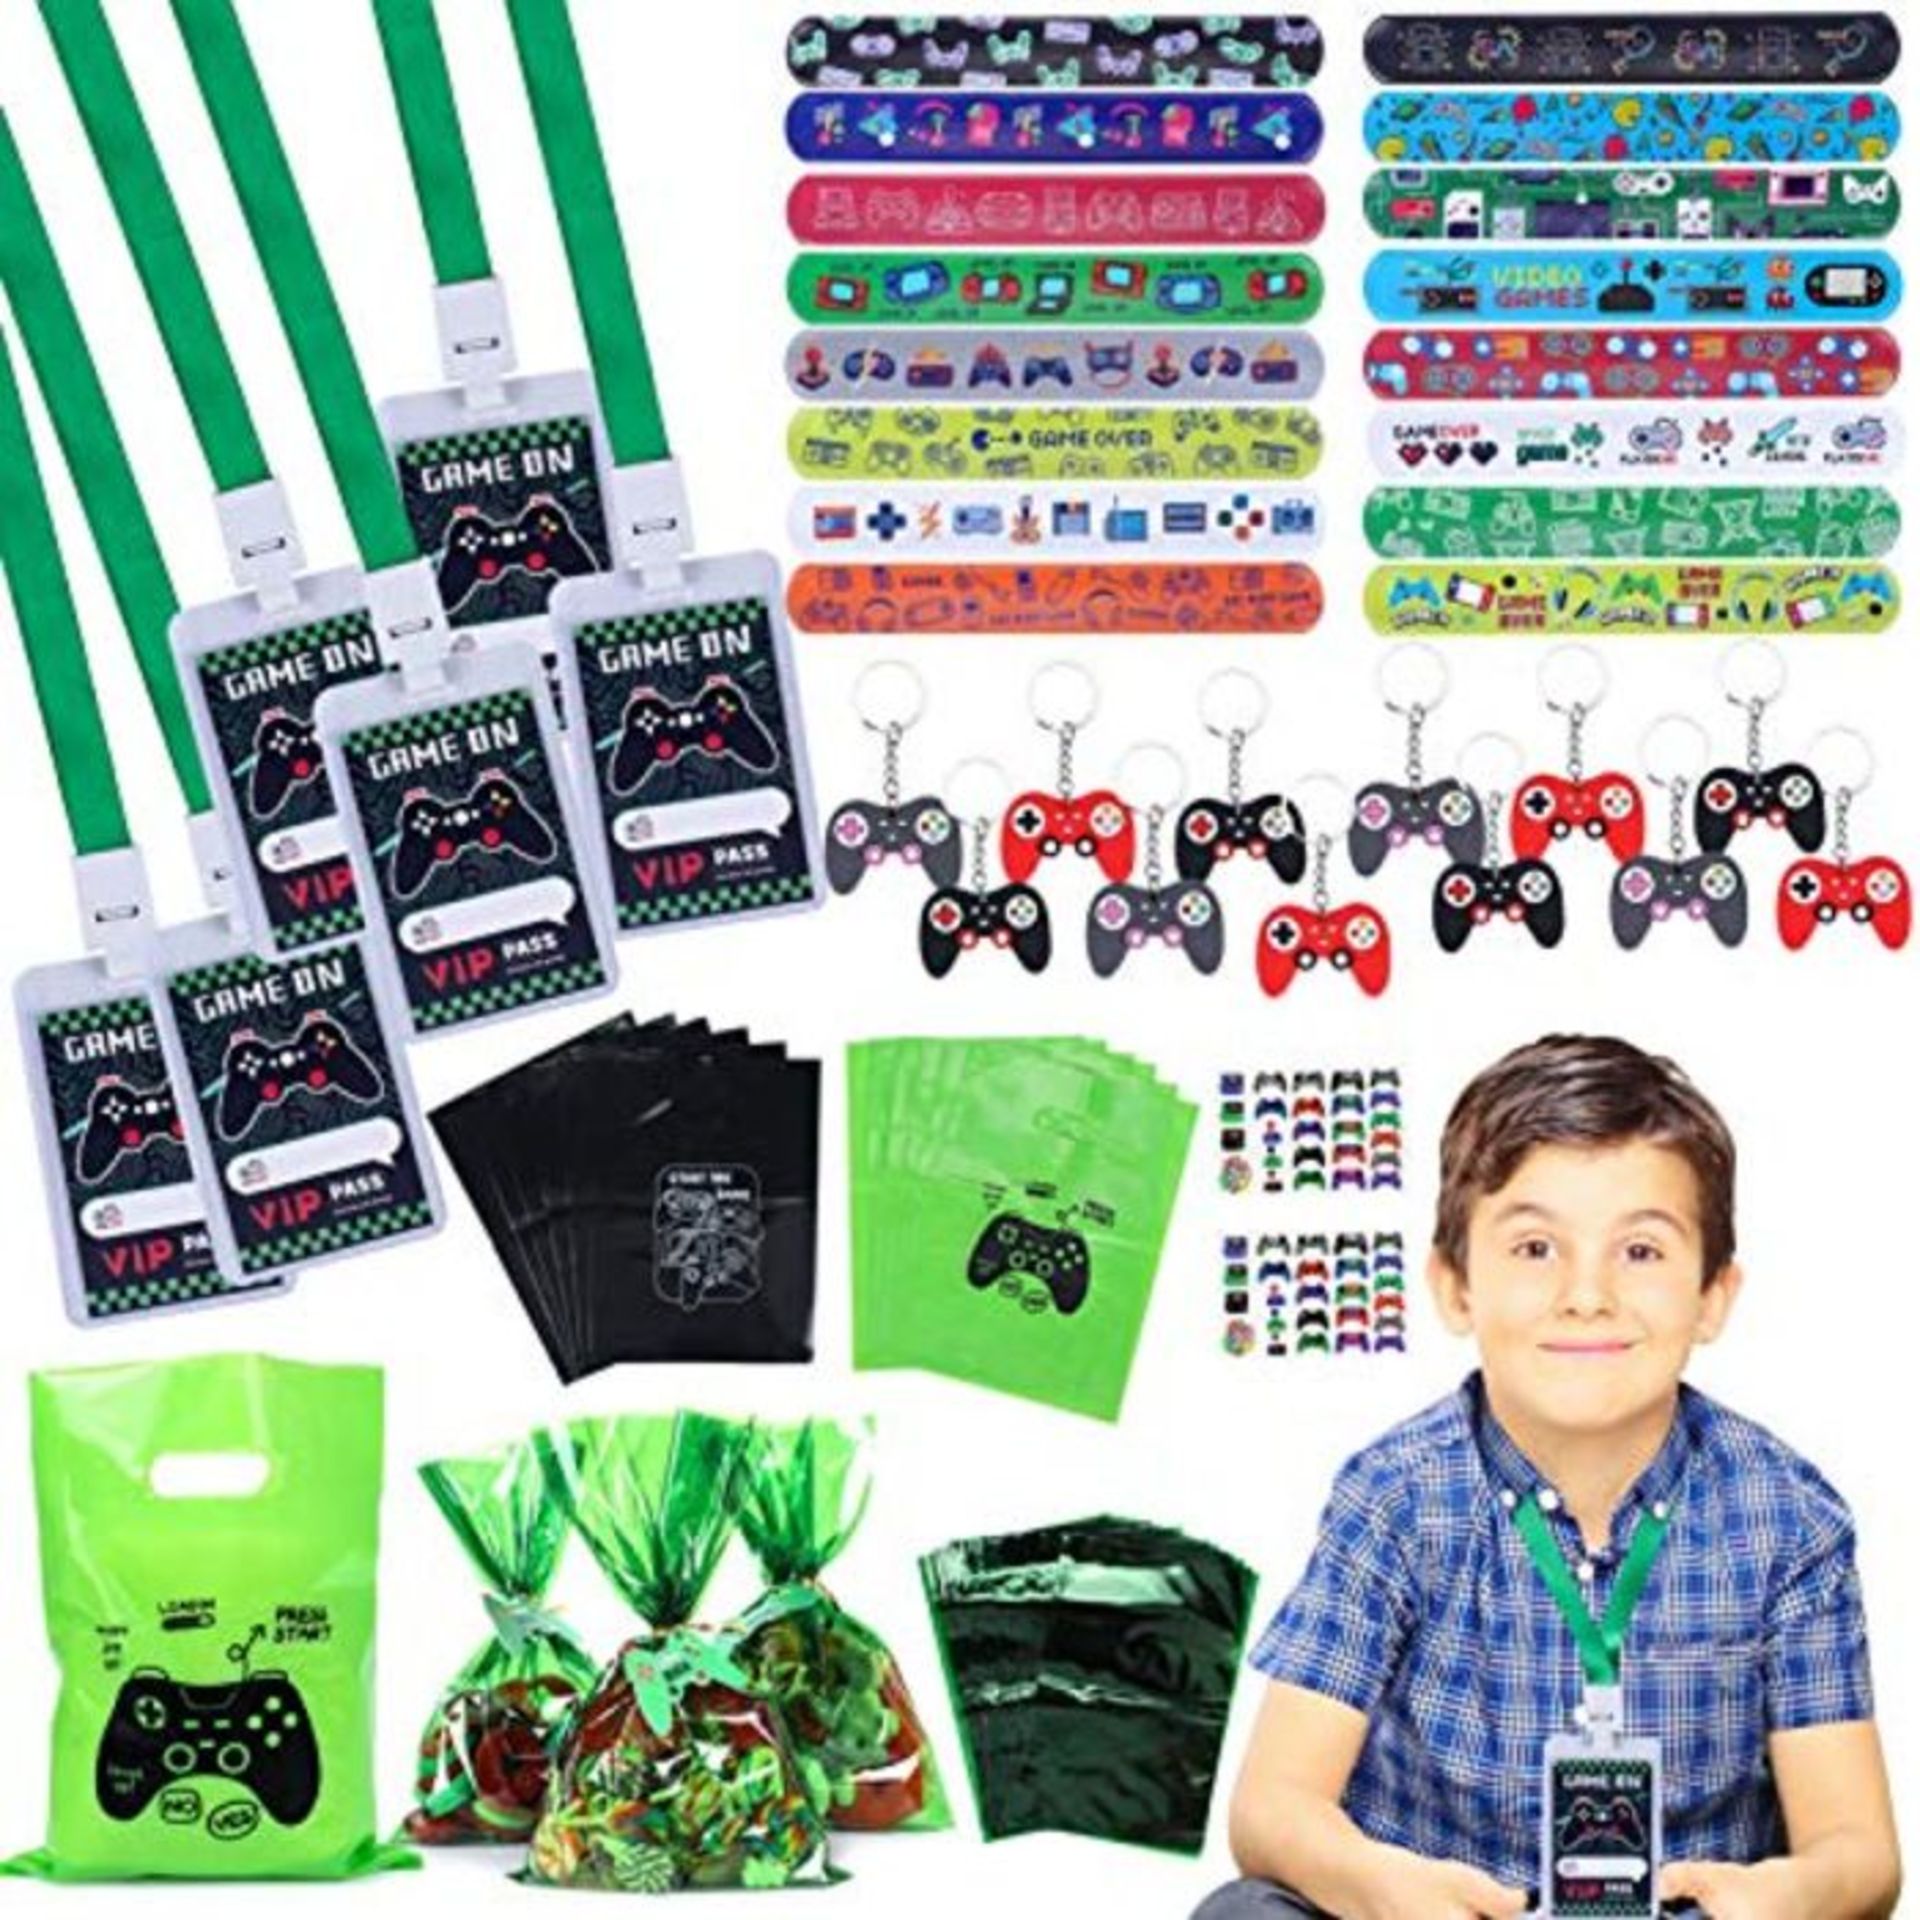 94pcs Video Game Party Favors with VIP Pass Gamer Slap Bracelets Keychain Tattoos Part